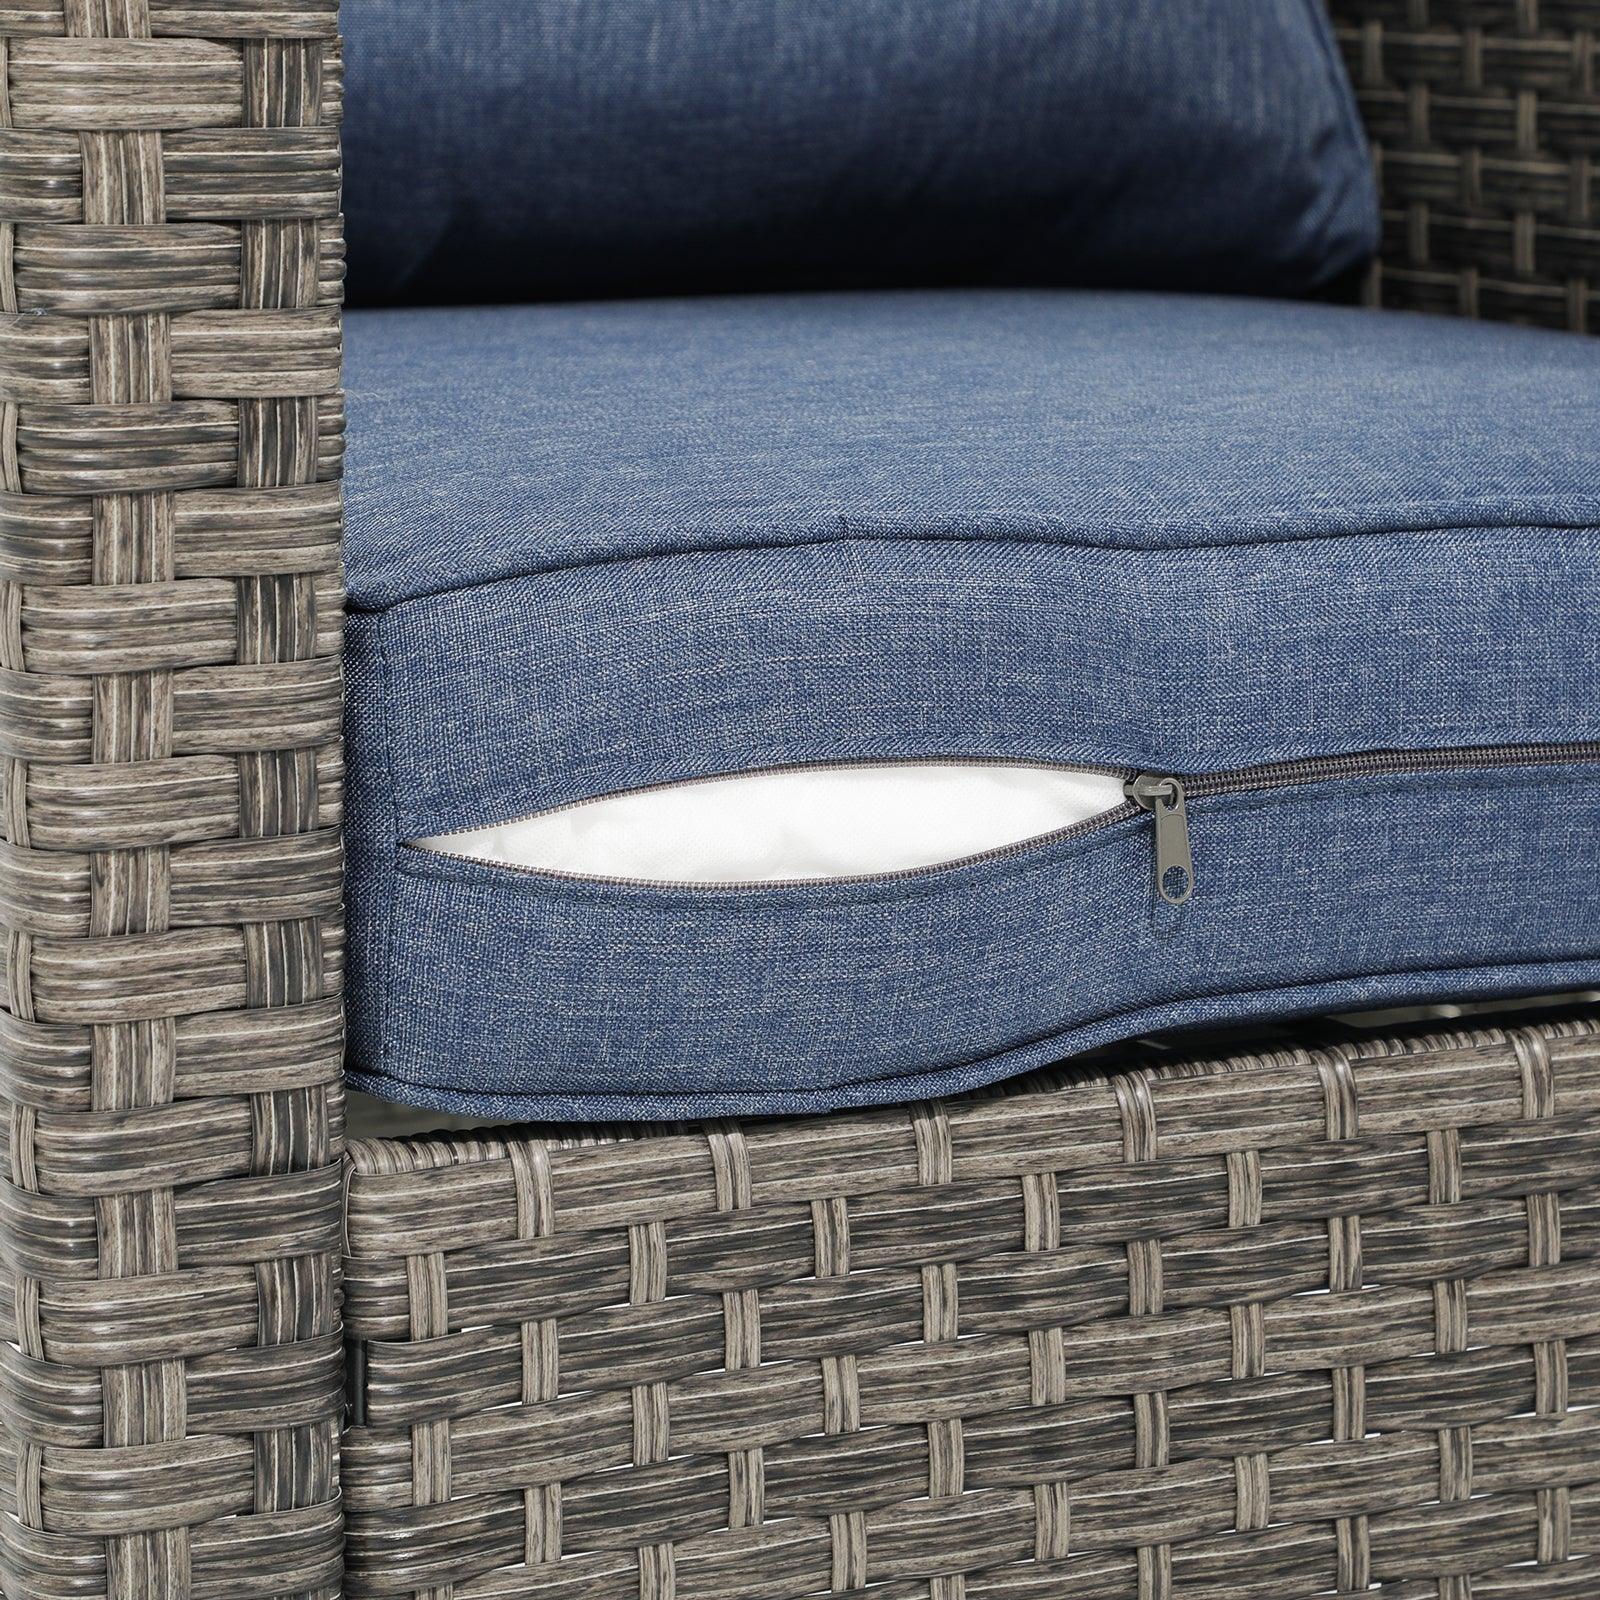 Ayia grey wicker outdoor sofa, with navy blue cushion details - Jardina Furniture #color_Navy blue